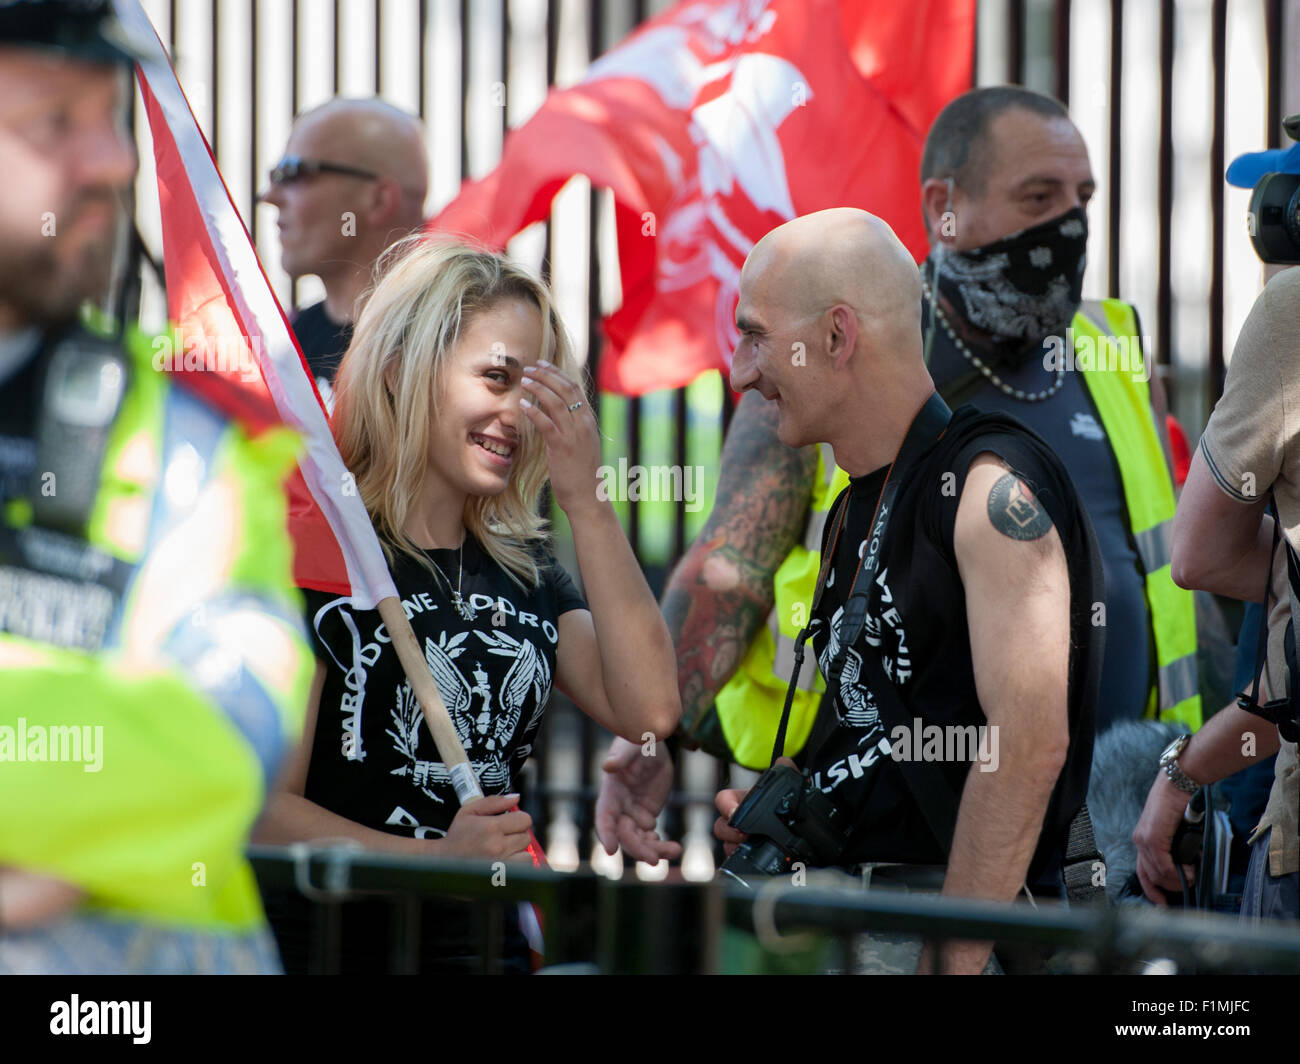 Far-right, anti-Semitic and racist groups hold a rally whilst anti-fascists hold a counter-protest nearby in London's Whitehall.  Featuring: View Where: London, United Kingdom When: 04 Jul 2015 Stock Photo